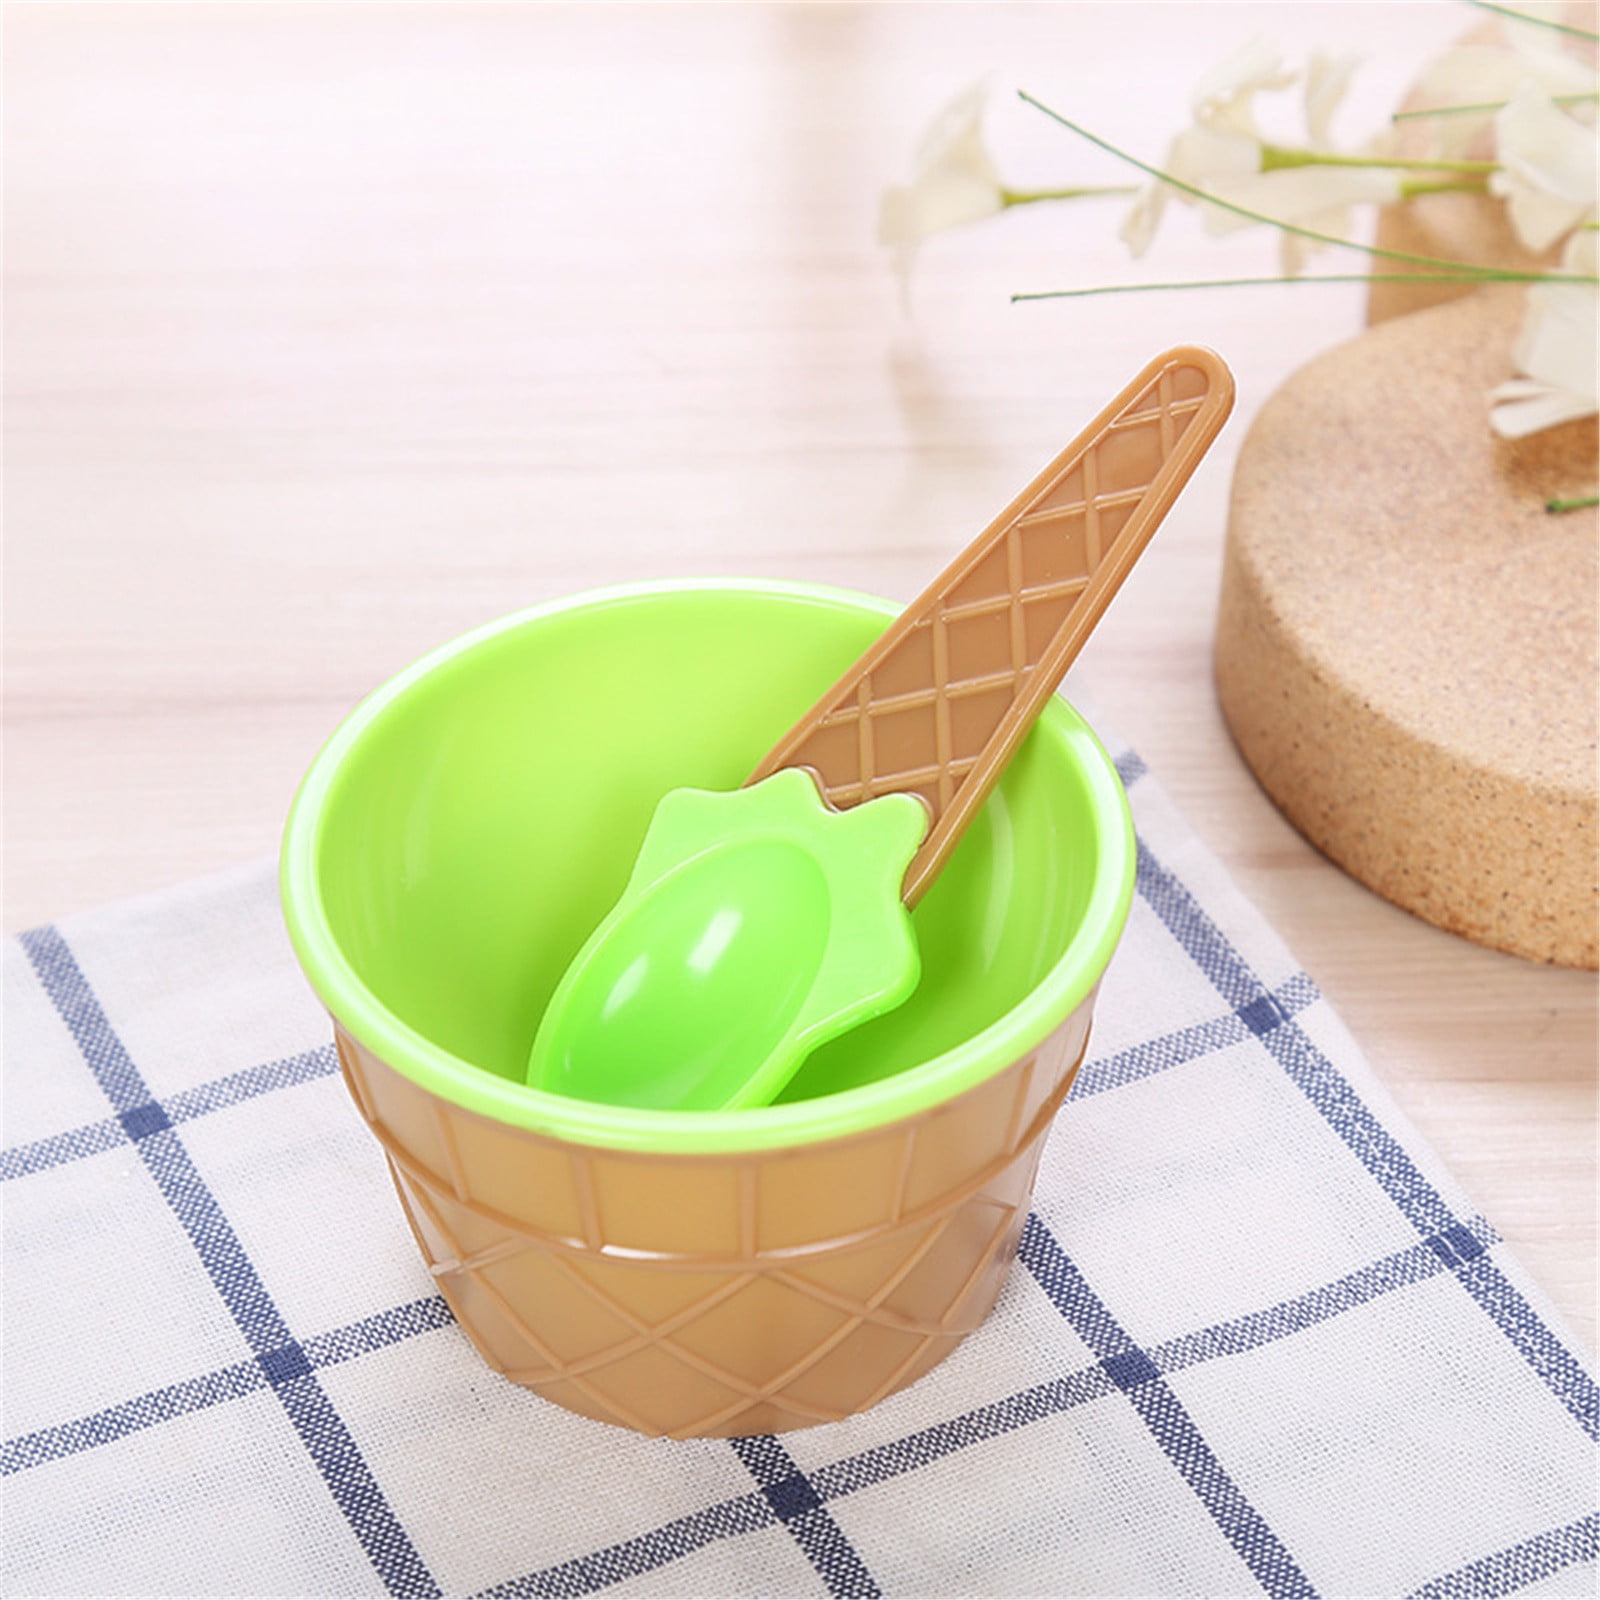 Vikakiooze Sales, Ice Cream Bowl With Spoon, Ice Cream Bowls Set For Kids  Cute Dessert Bowls For Summer Holiday Parties, Ice Cream Cups 